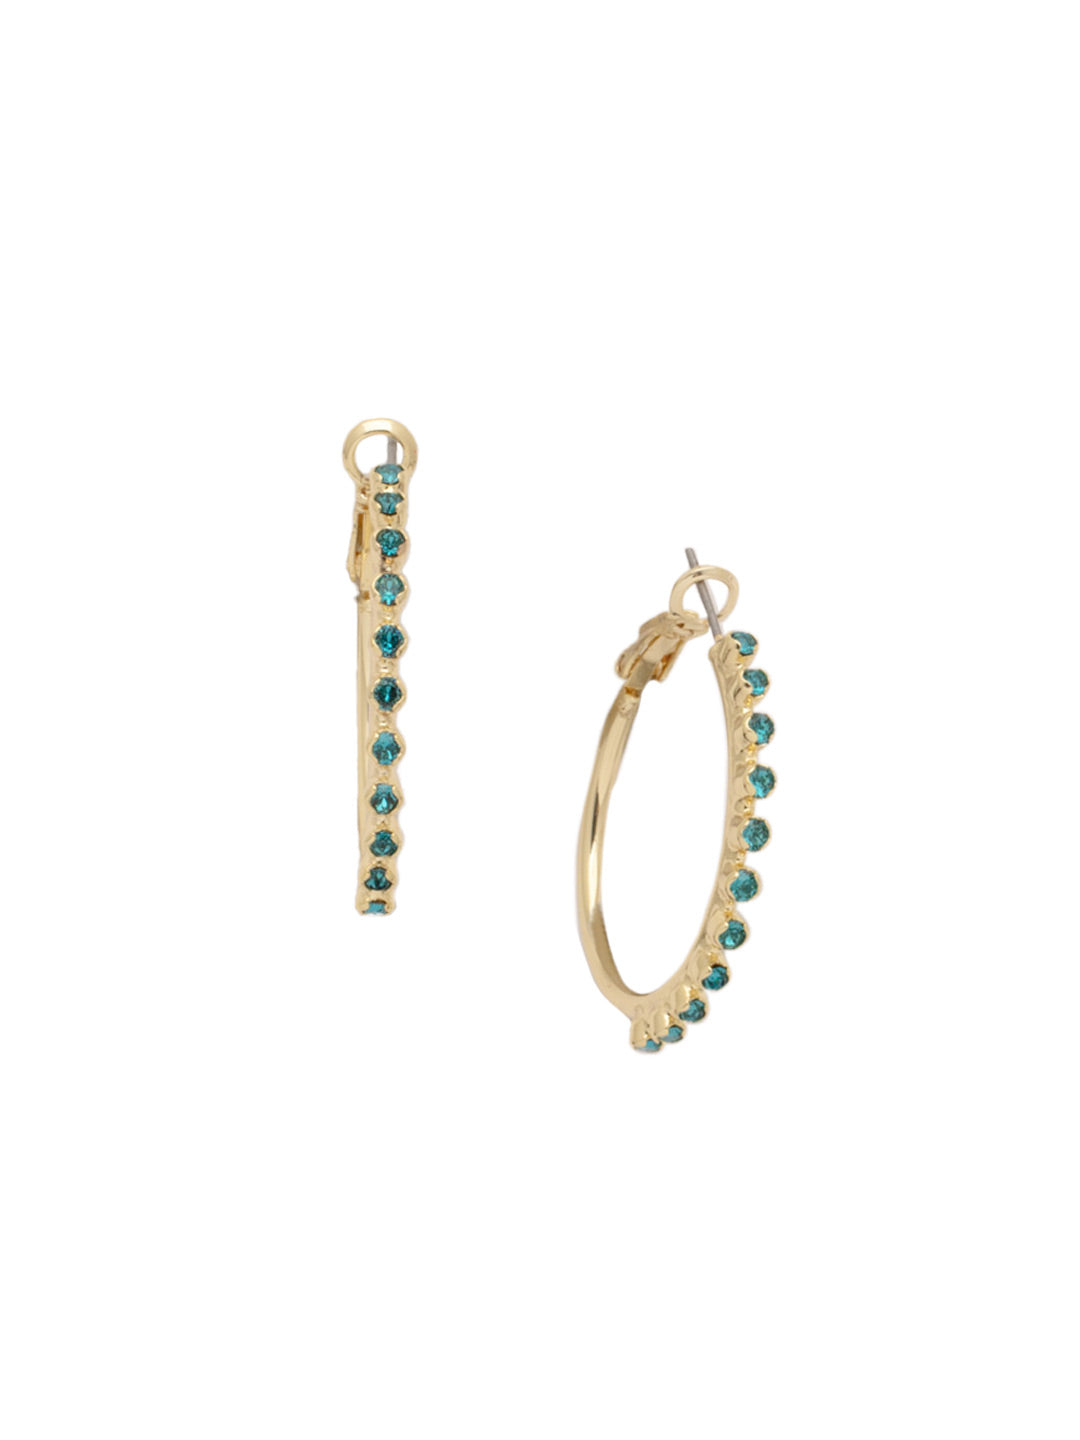 Tyra Hoop Earrings - EFF41BGHBR - <p>The Trya Hoop Earrings feature a row of crystals on a classic metal hoop. From Sorrelli's Happy Birthday Redux collection in our Bright Gold-tone finish.</p>